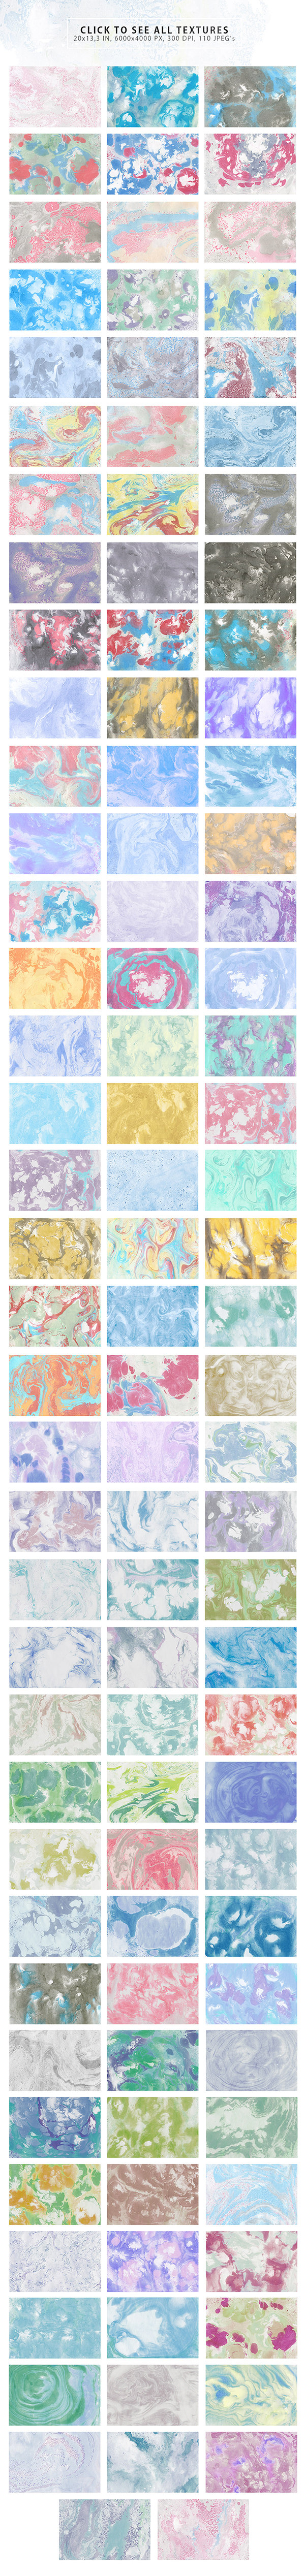 110 Marble Ink Paper Textures By ArtistMef